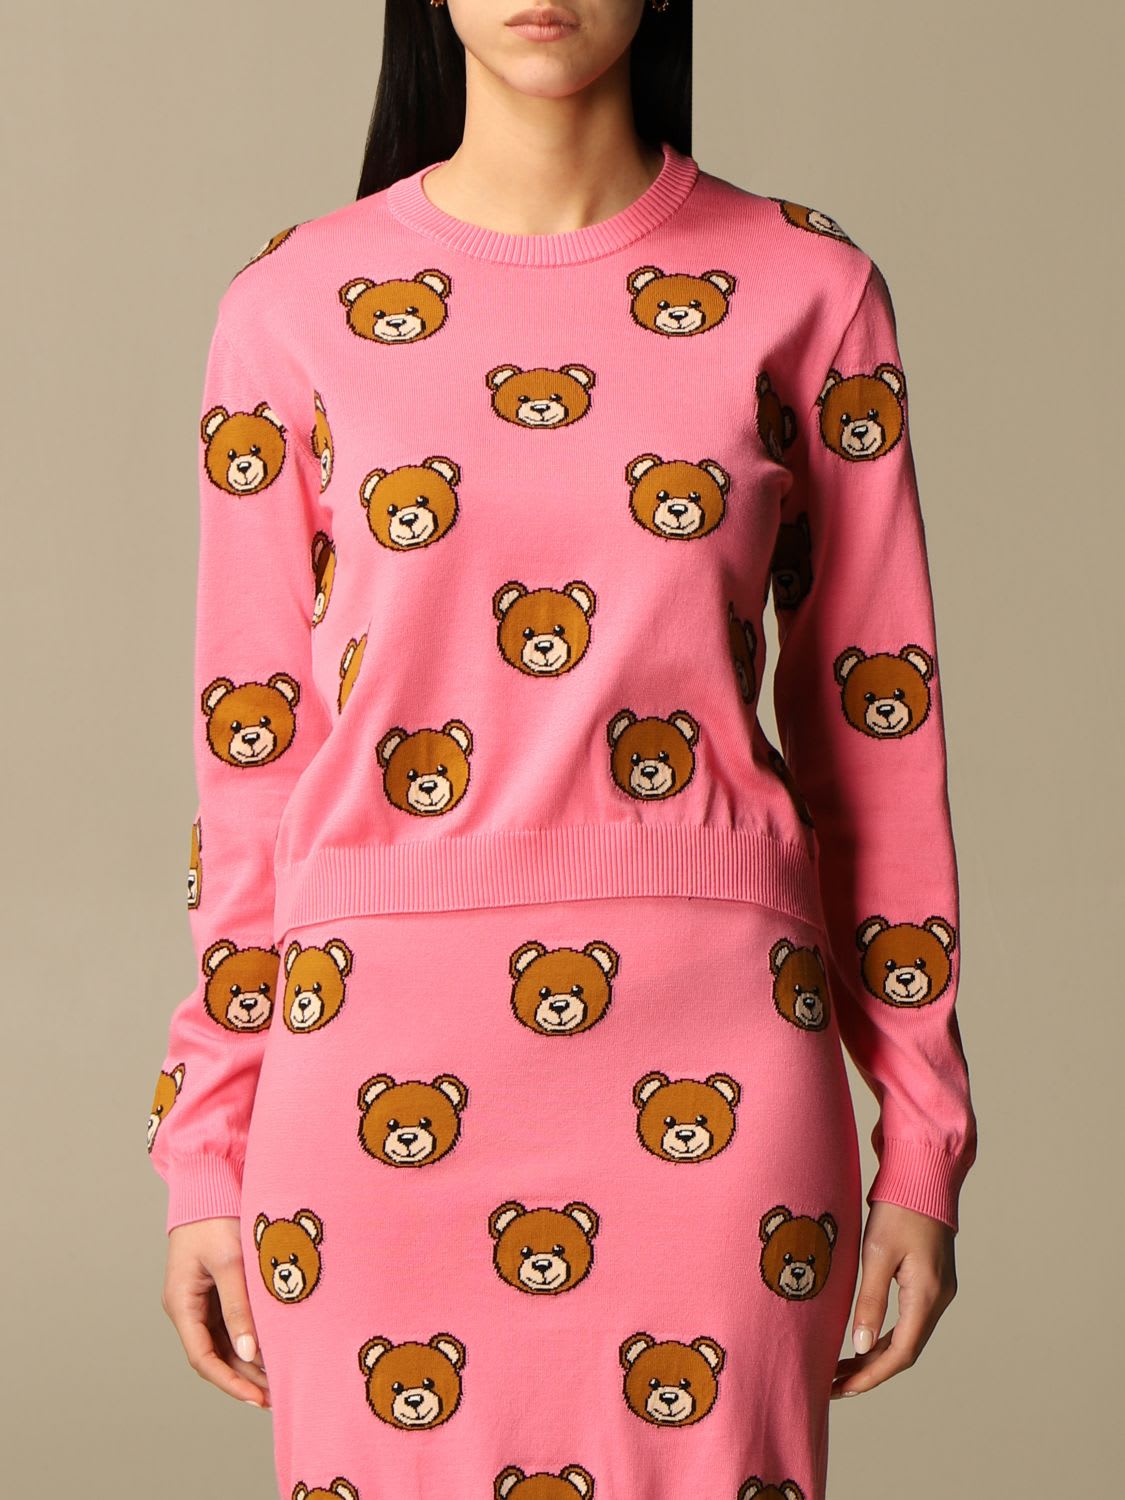 Moschino Couture Sweater Moschino Couture Knit Sweater With All-over Teddy